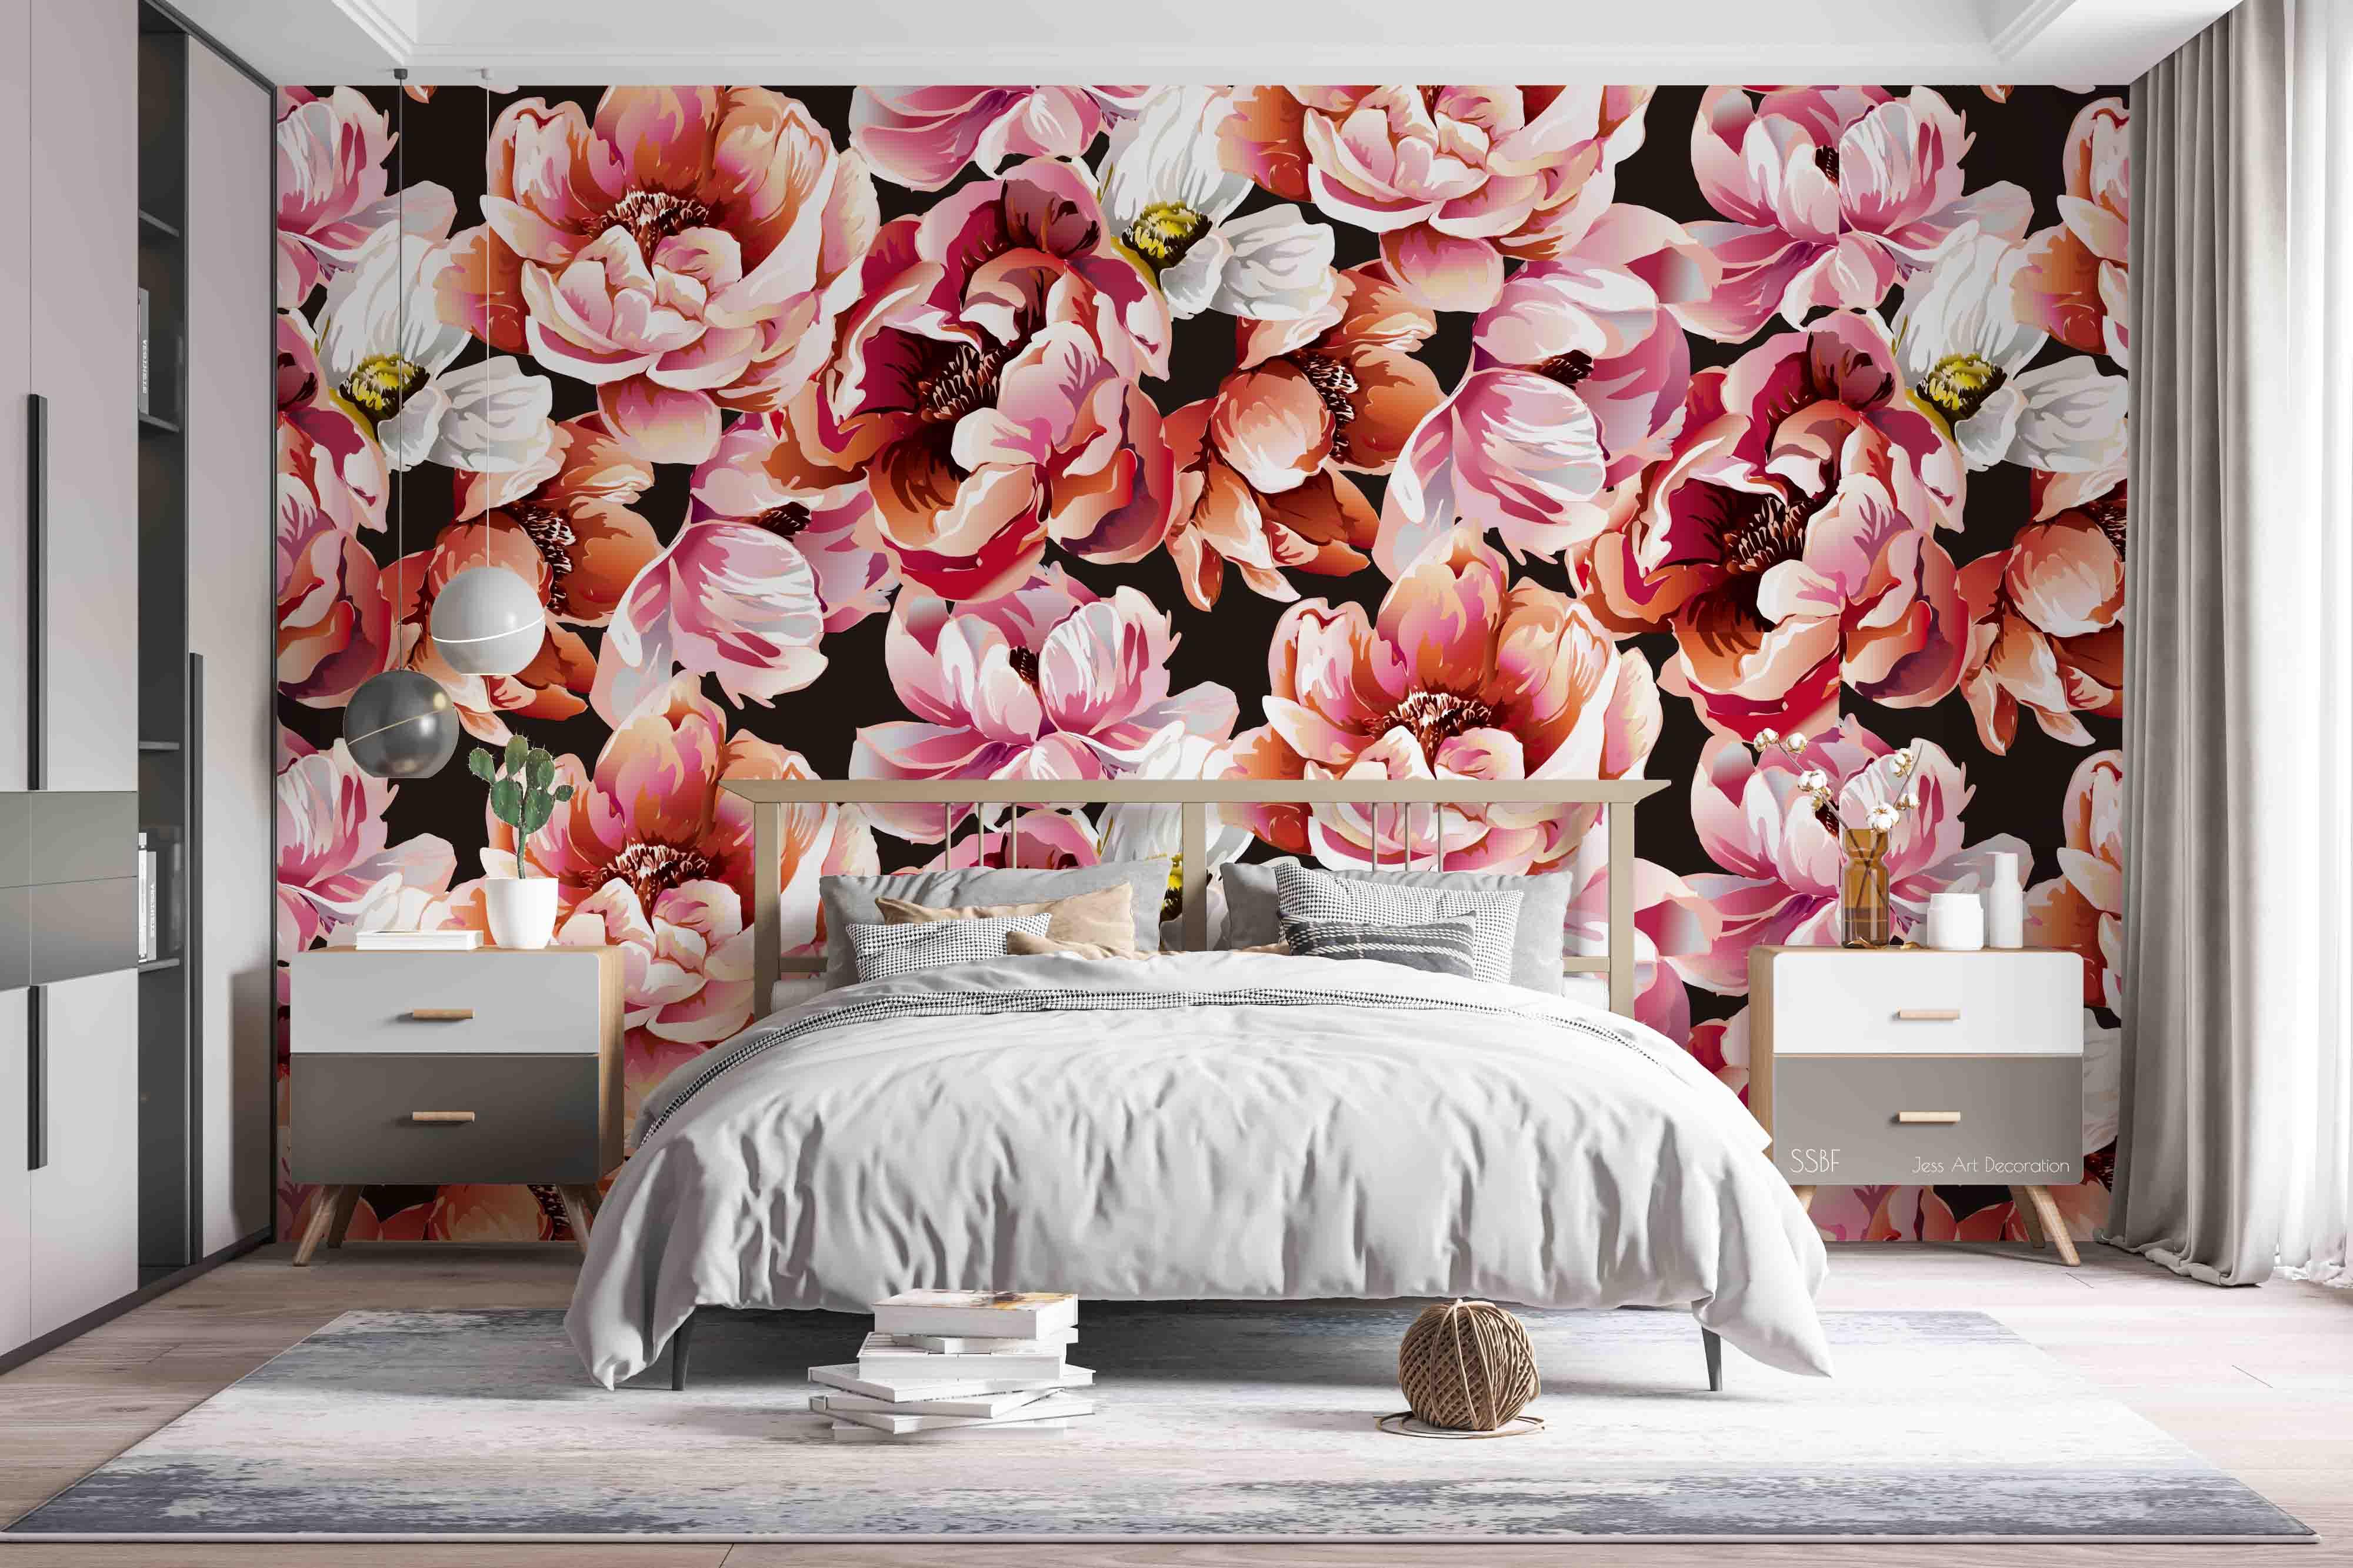 3D Vintage Baroque Art Blooming Pink Peony Watercolor Wall Mural Wallpaper GD 3569- Jess Art Decoration